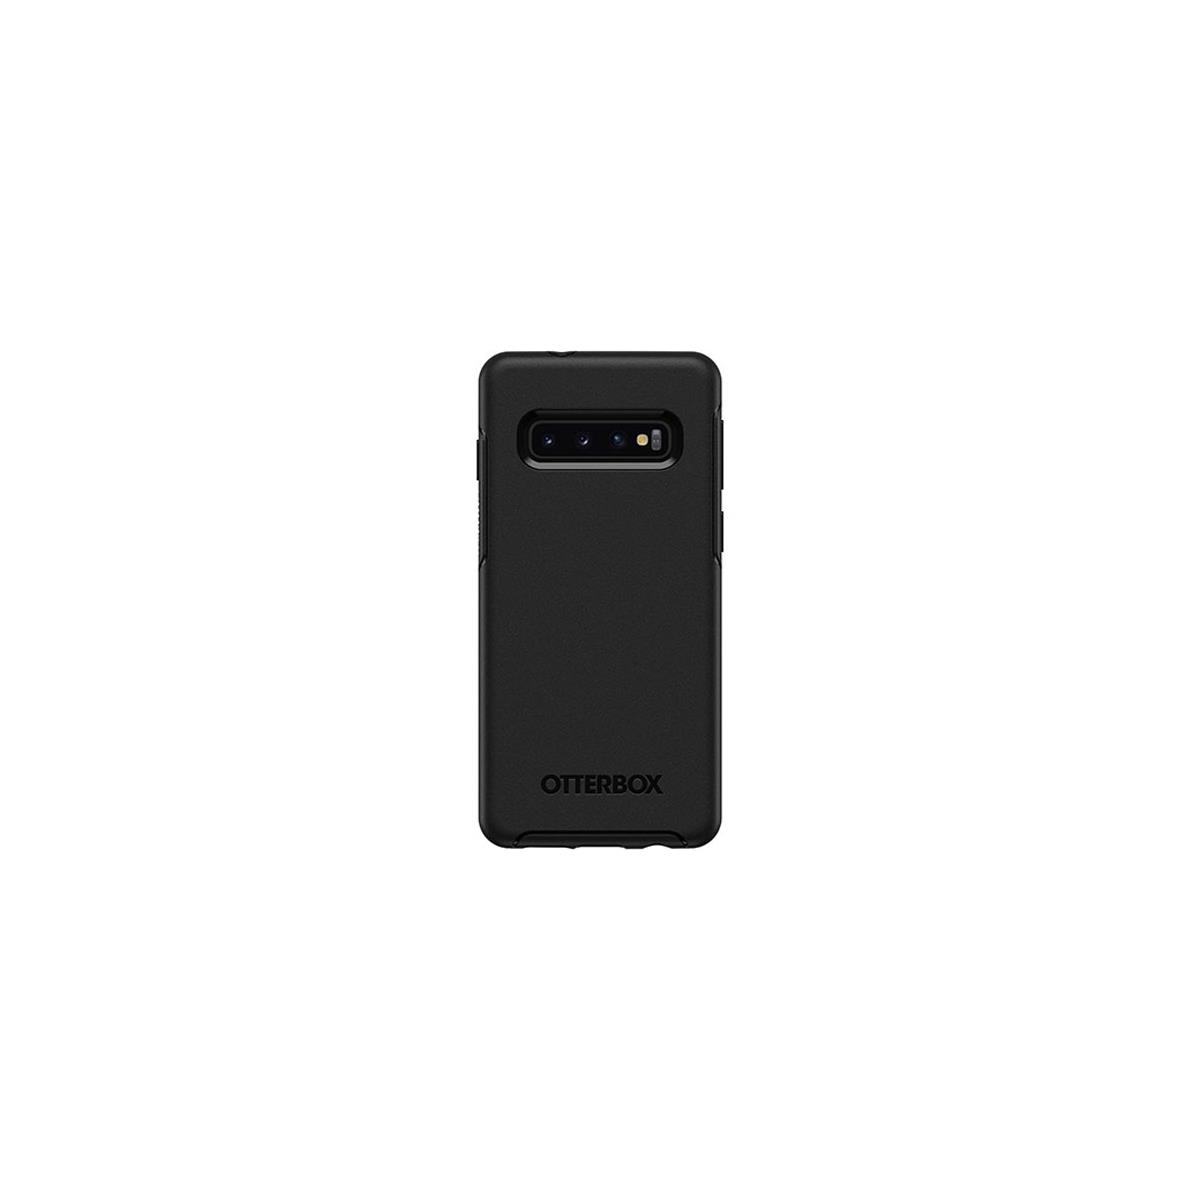 Image of OtterBox Symmetry Series Case for Samsung Galaxy S10 Smartphone